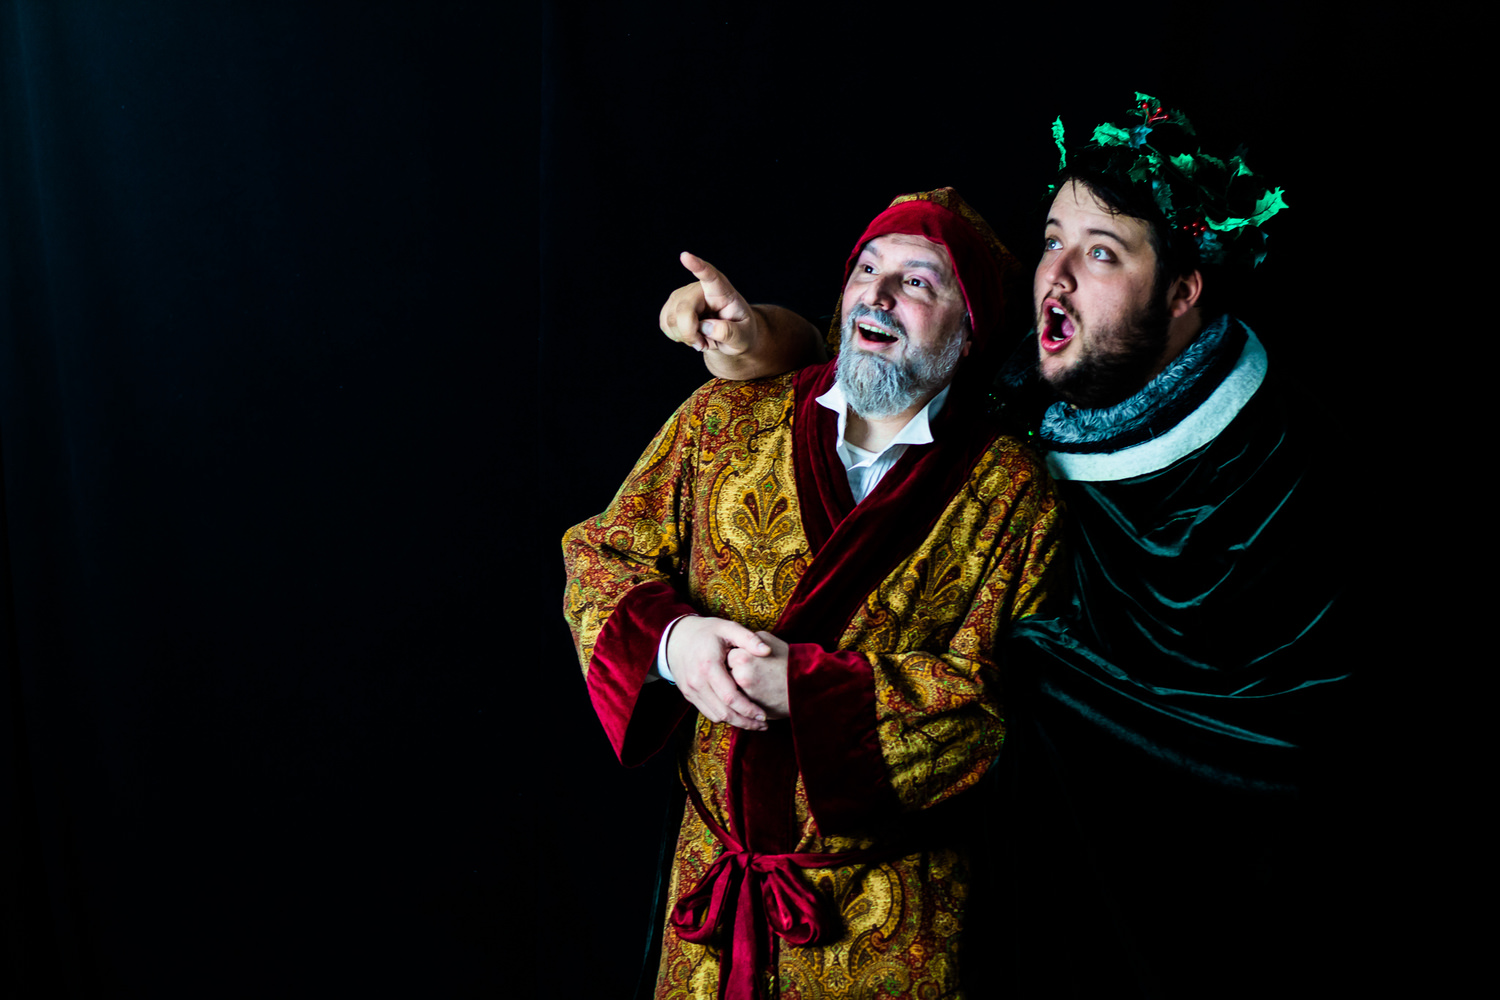 Darrell Meek as Scrooge and Scott Bagwill as The Ghost of Christmas Present. Photo courtesy of Lauren Cibene